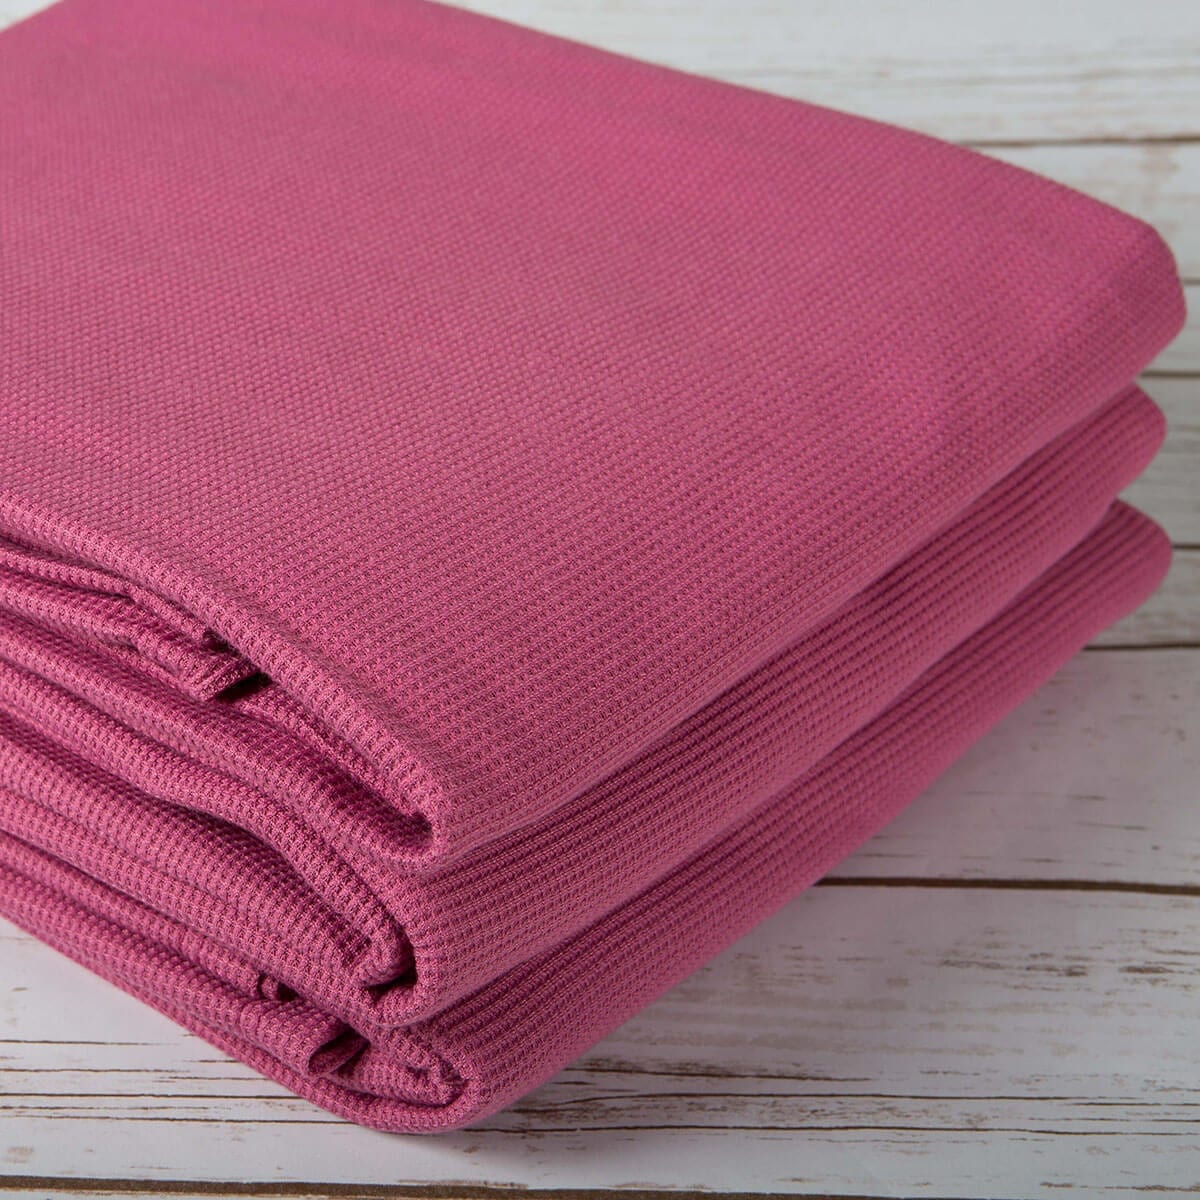 Ambulance blankets in mulberry red